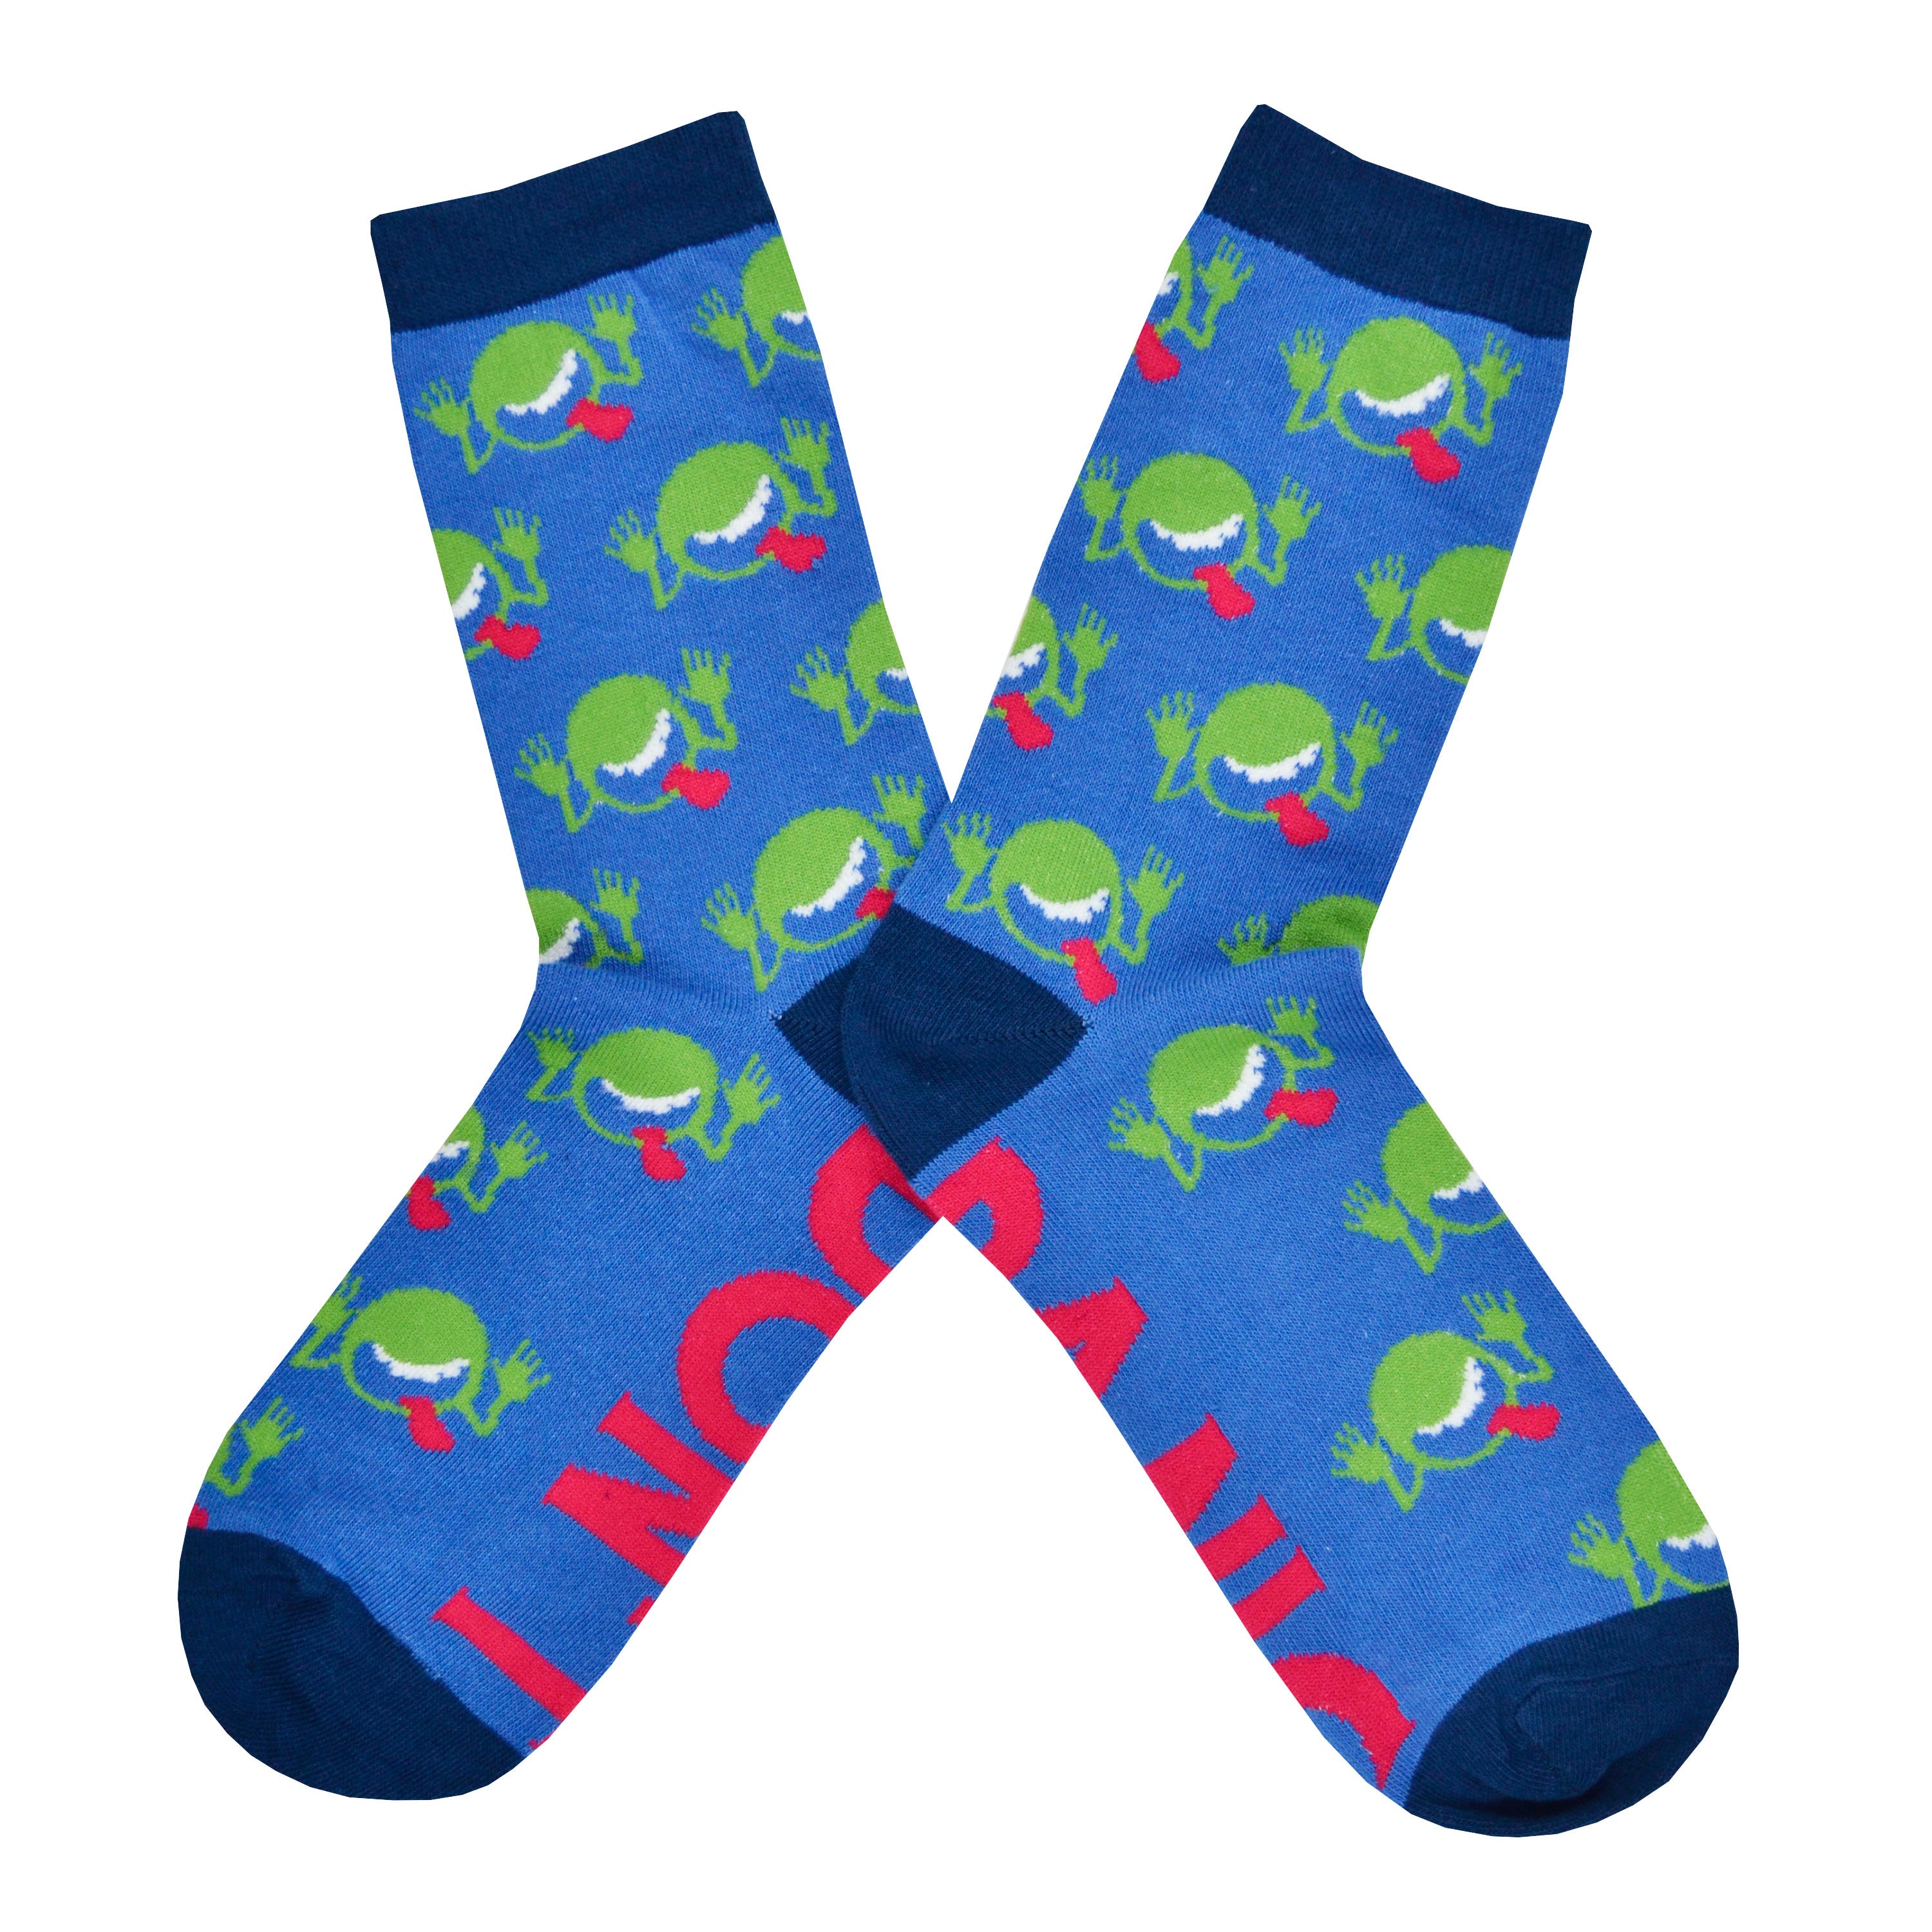 Shown in a flatlay, a pair of unisex Out of Print blue cotton crew socks with green goofy faces sticking out their tongue like on the book cover, “Don’t” on the sole of one foot, “Panic” on the other, and navy cuff/heel/toe